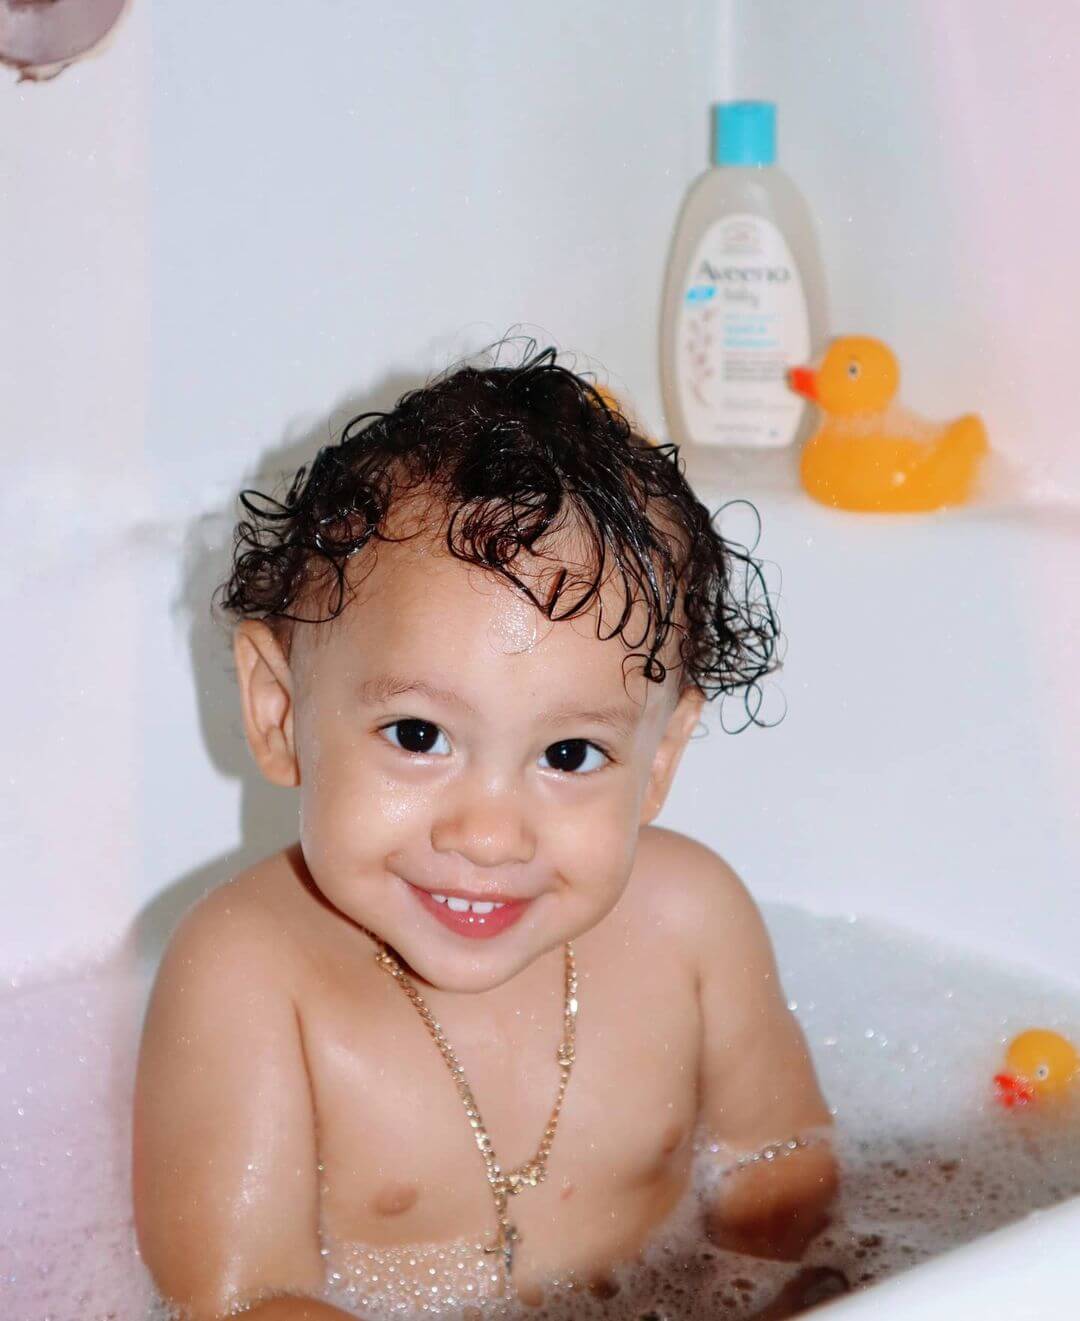 Baby with curly hair taking a bath